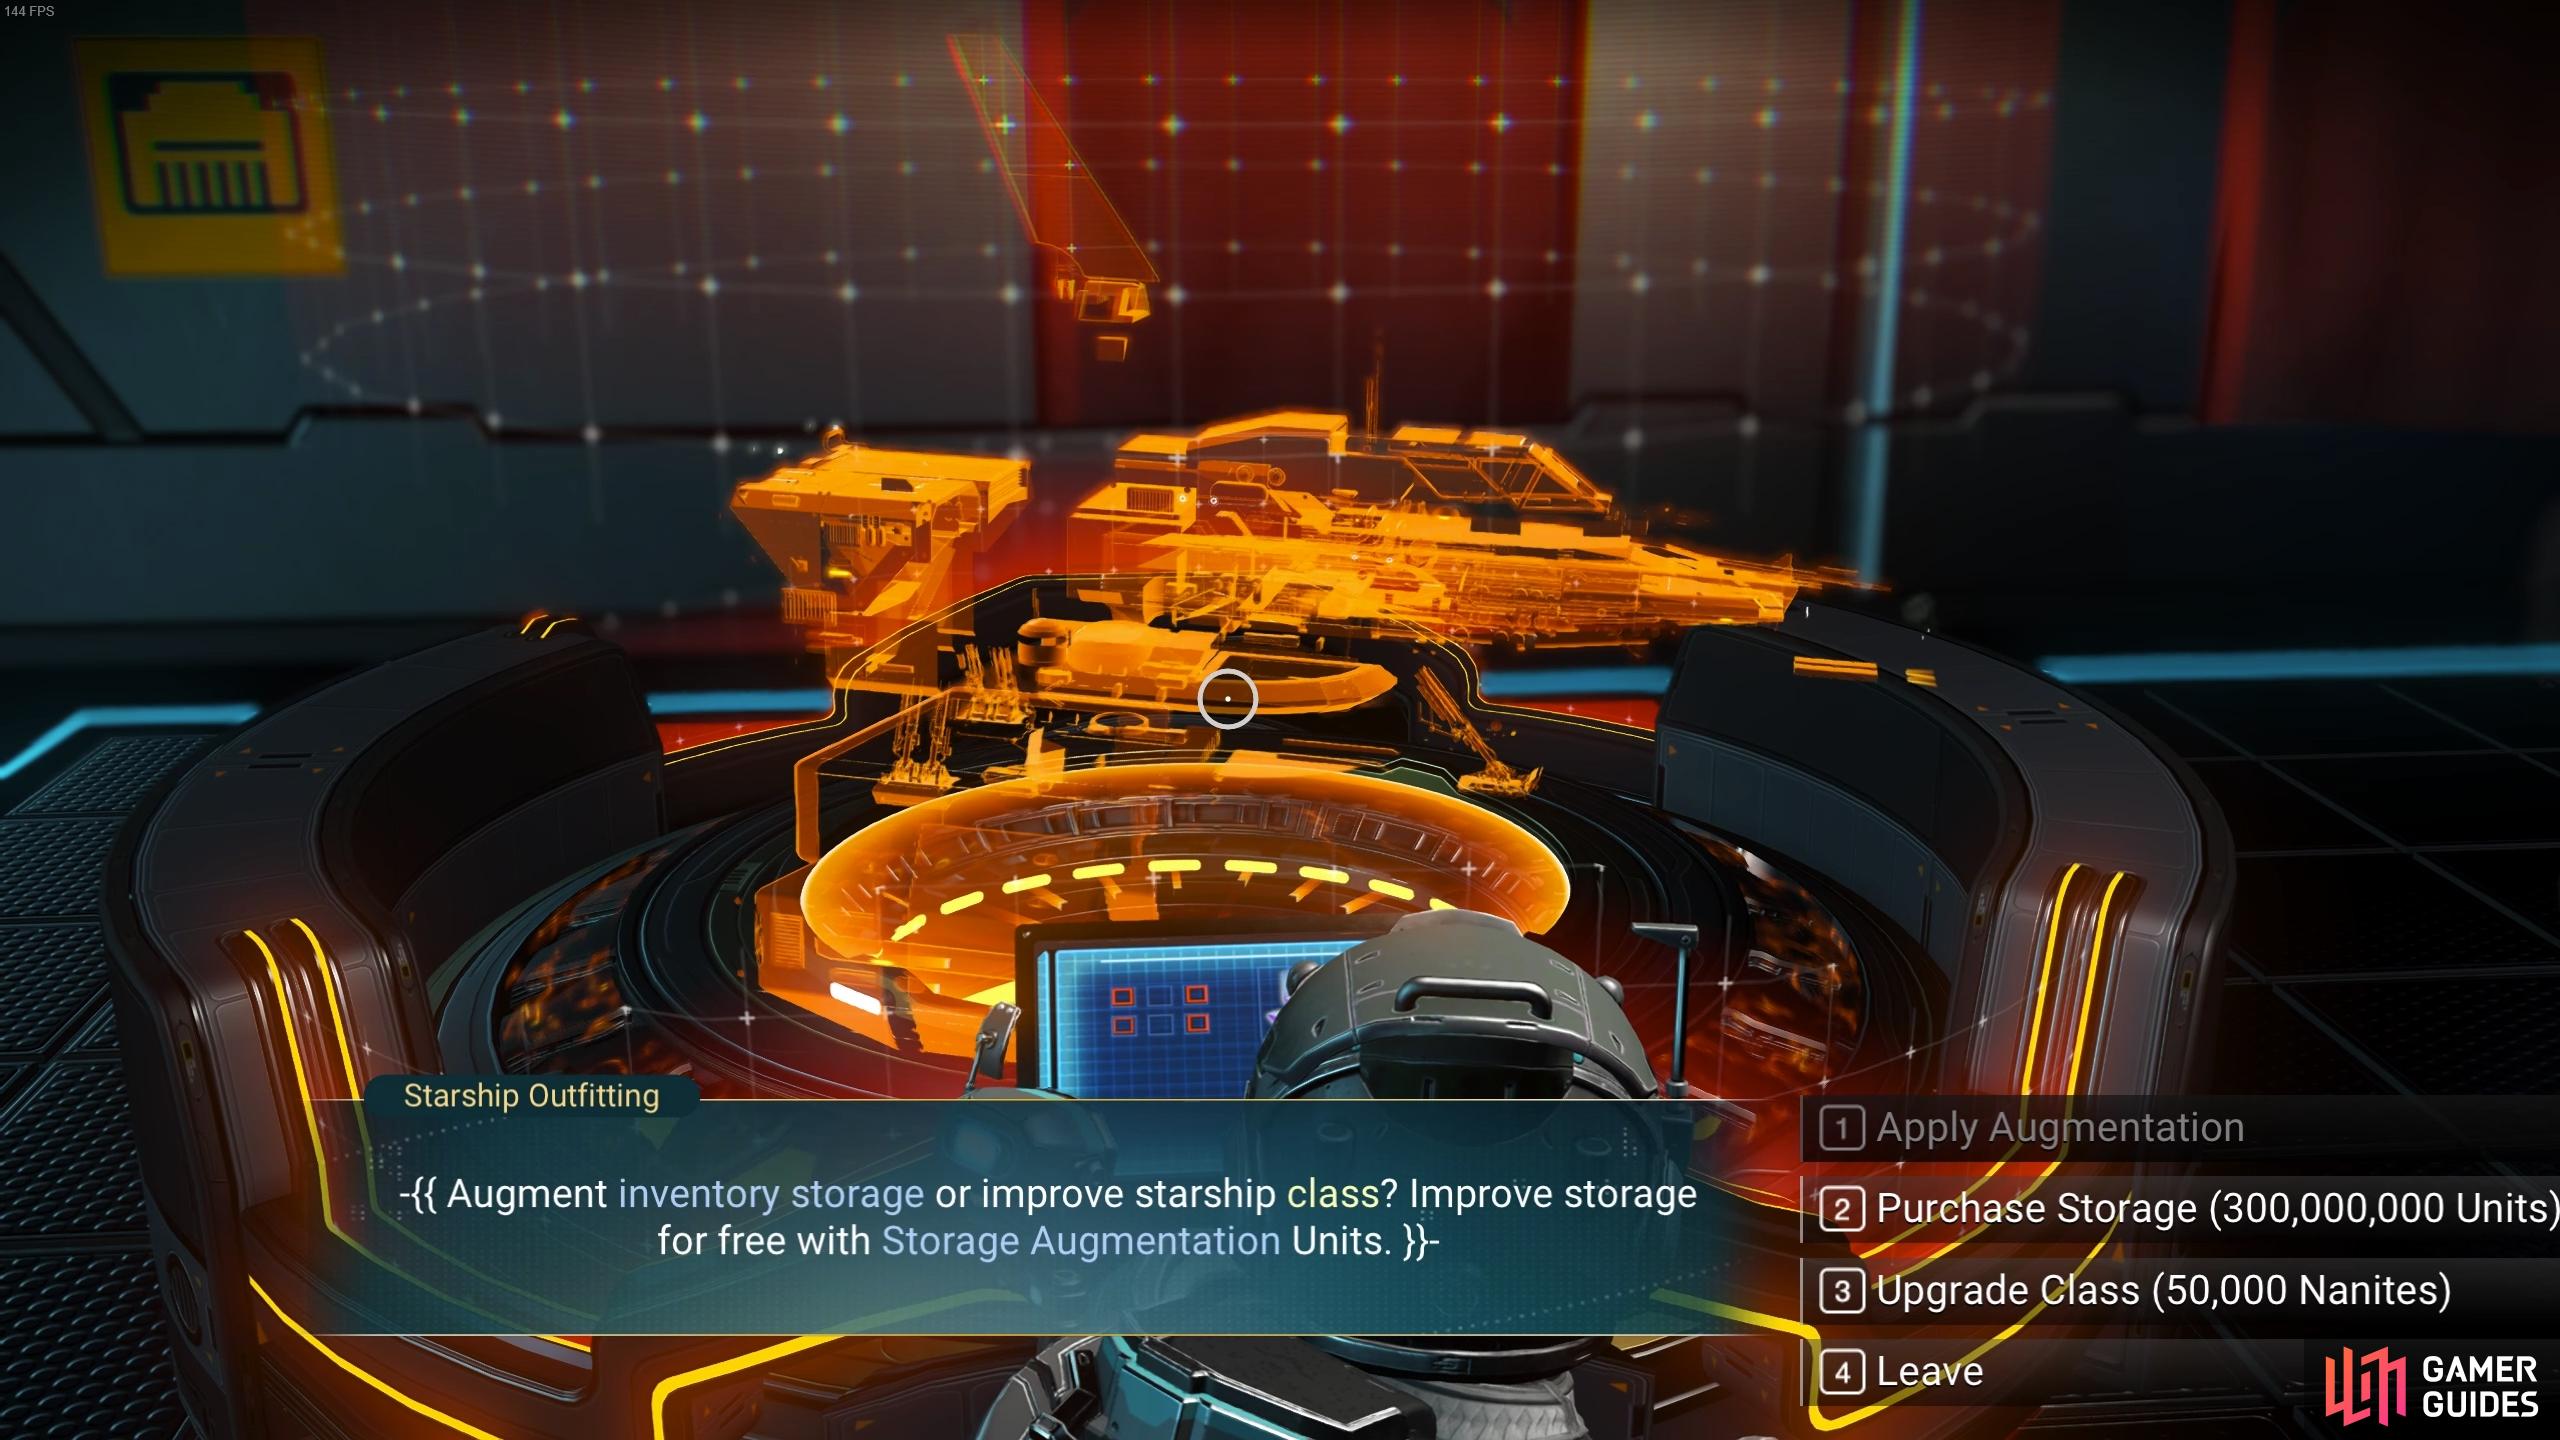 At the Starship Outfitting hub, you can upgrade the class tier of your ship with Nanites, or increase inventory slots with Units.